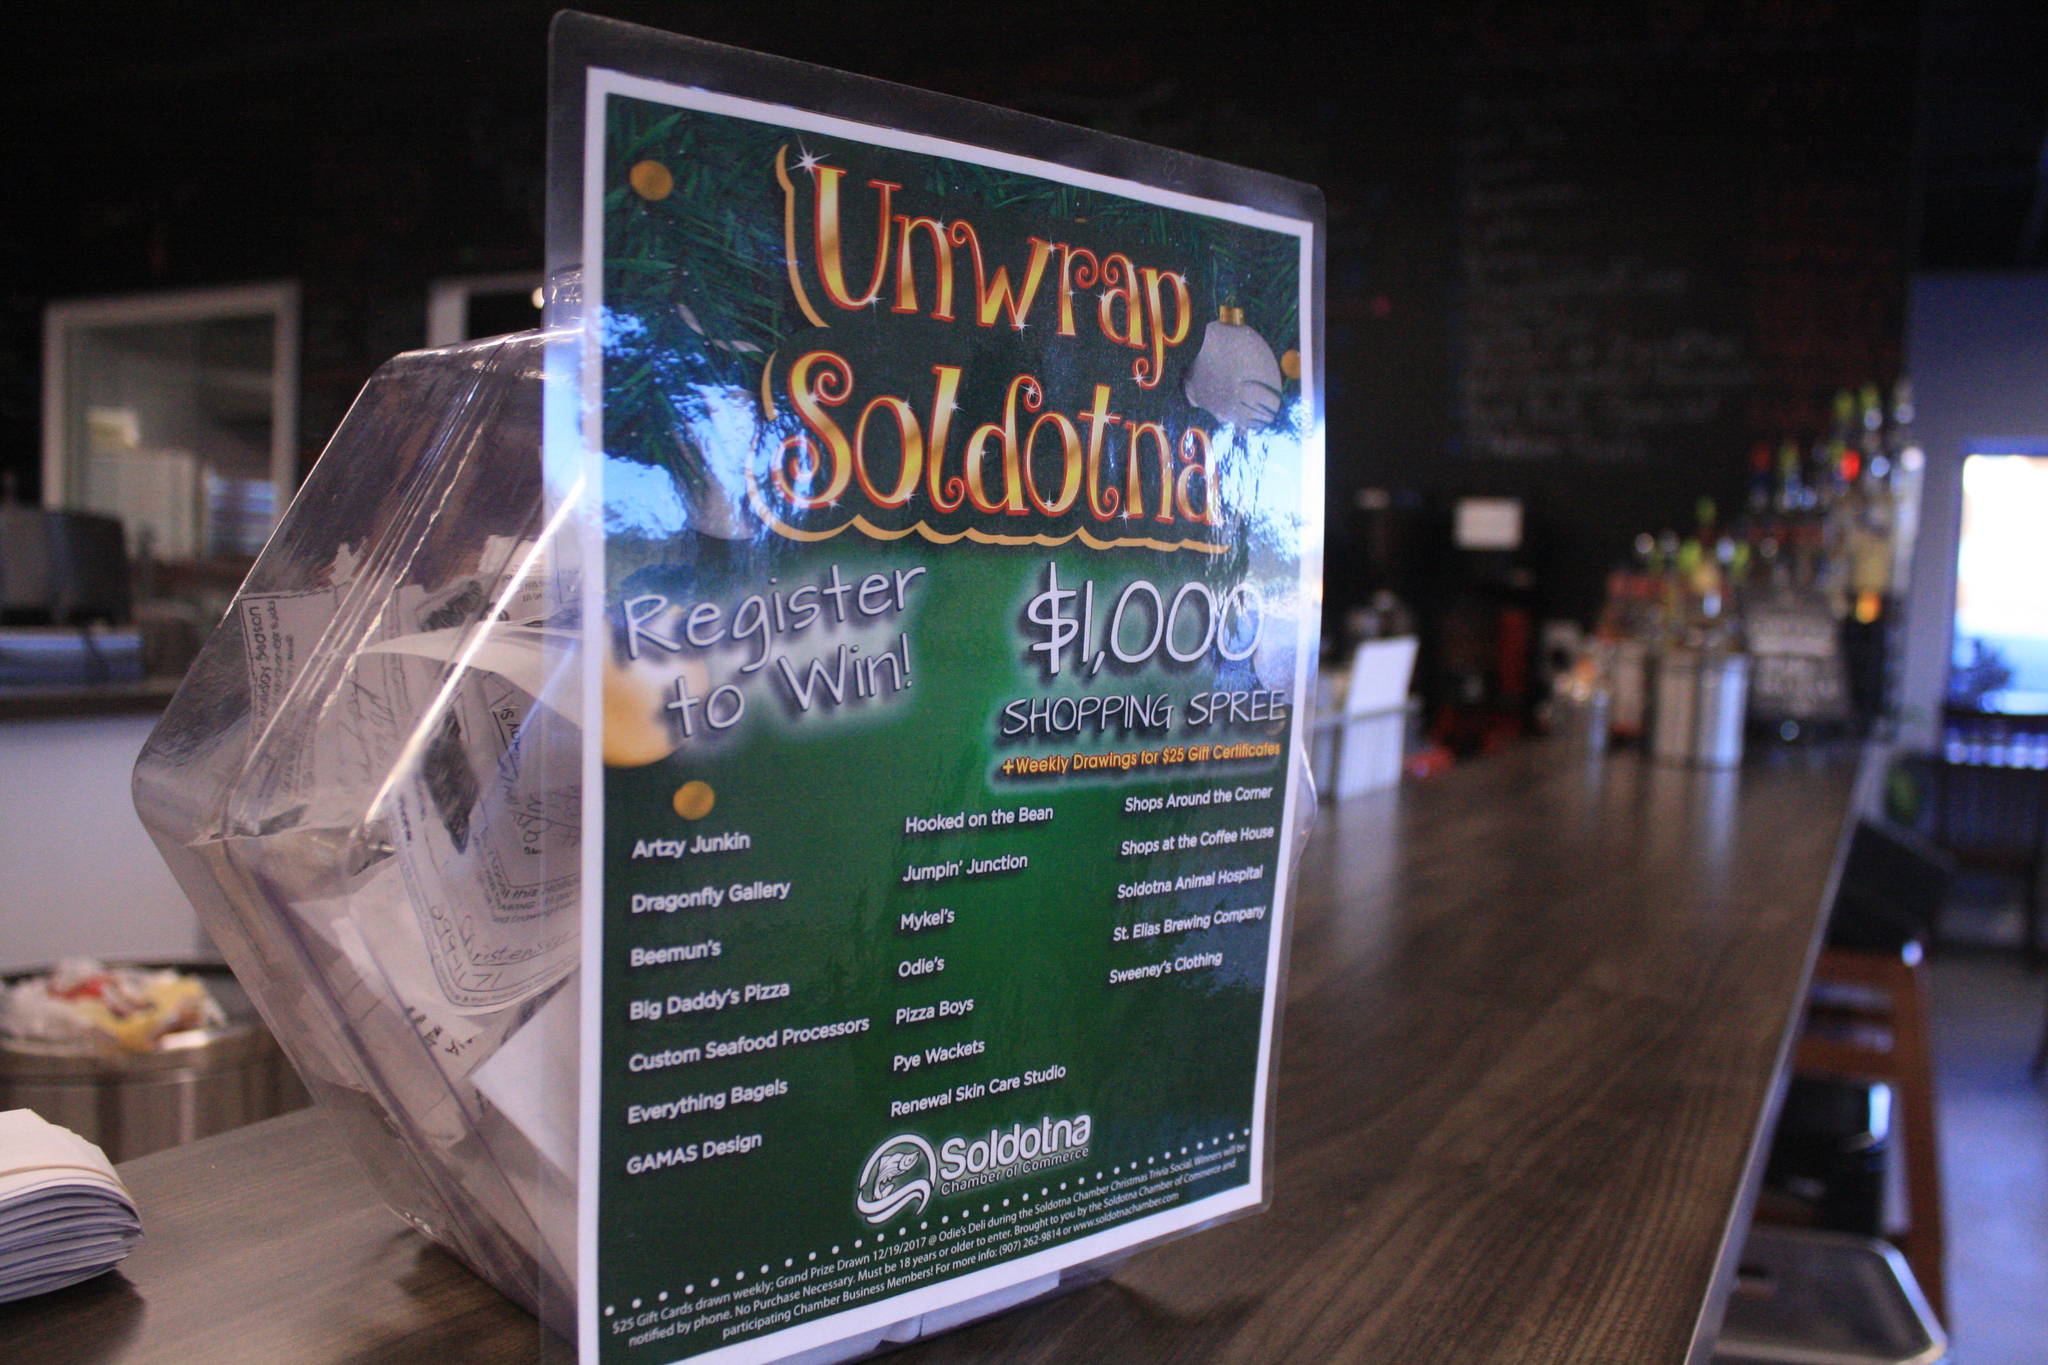 “Unwrap Soldotna” promotes local holiday spending by offering prizes to customers who frequent local establishments.